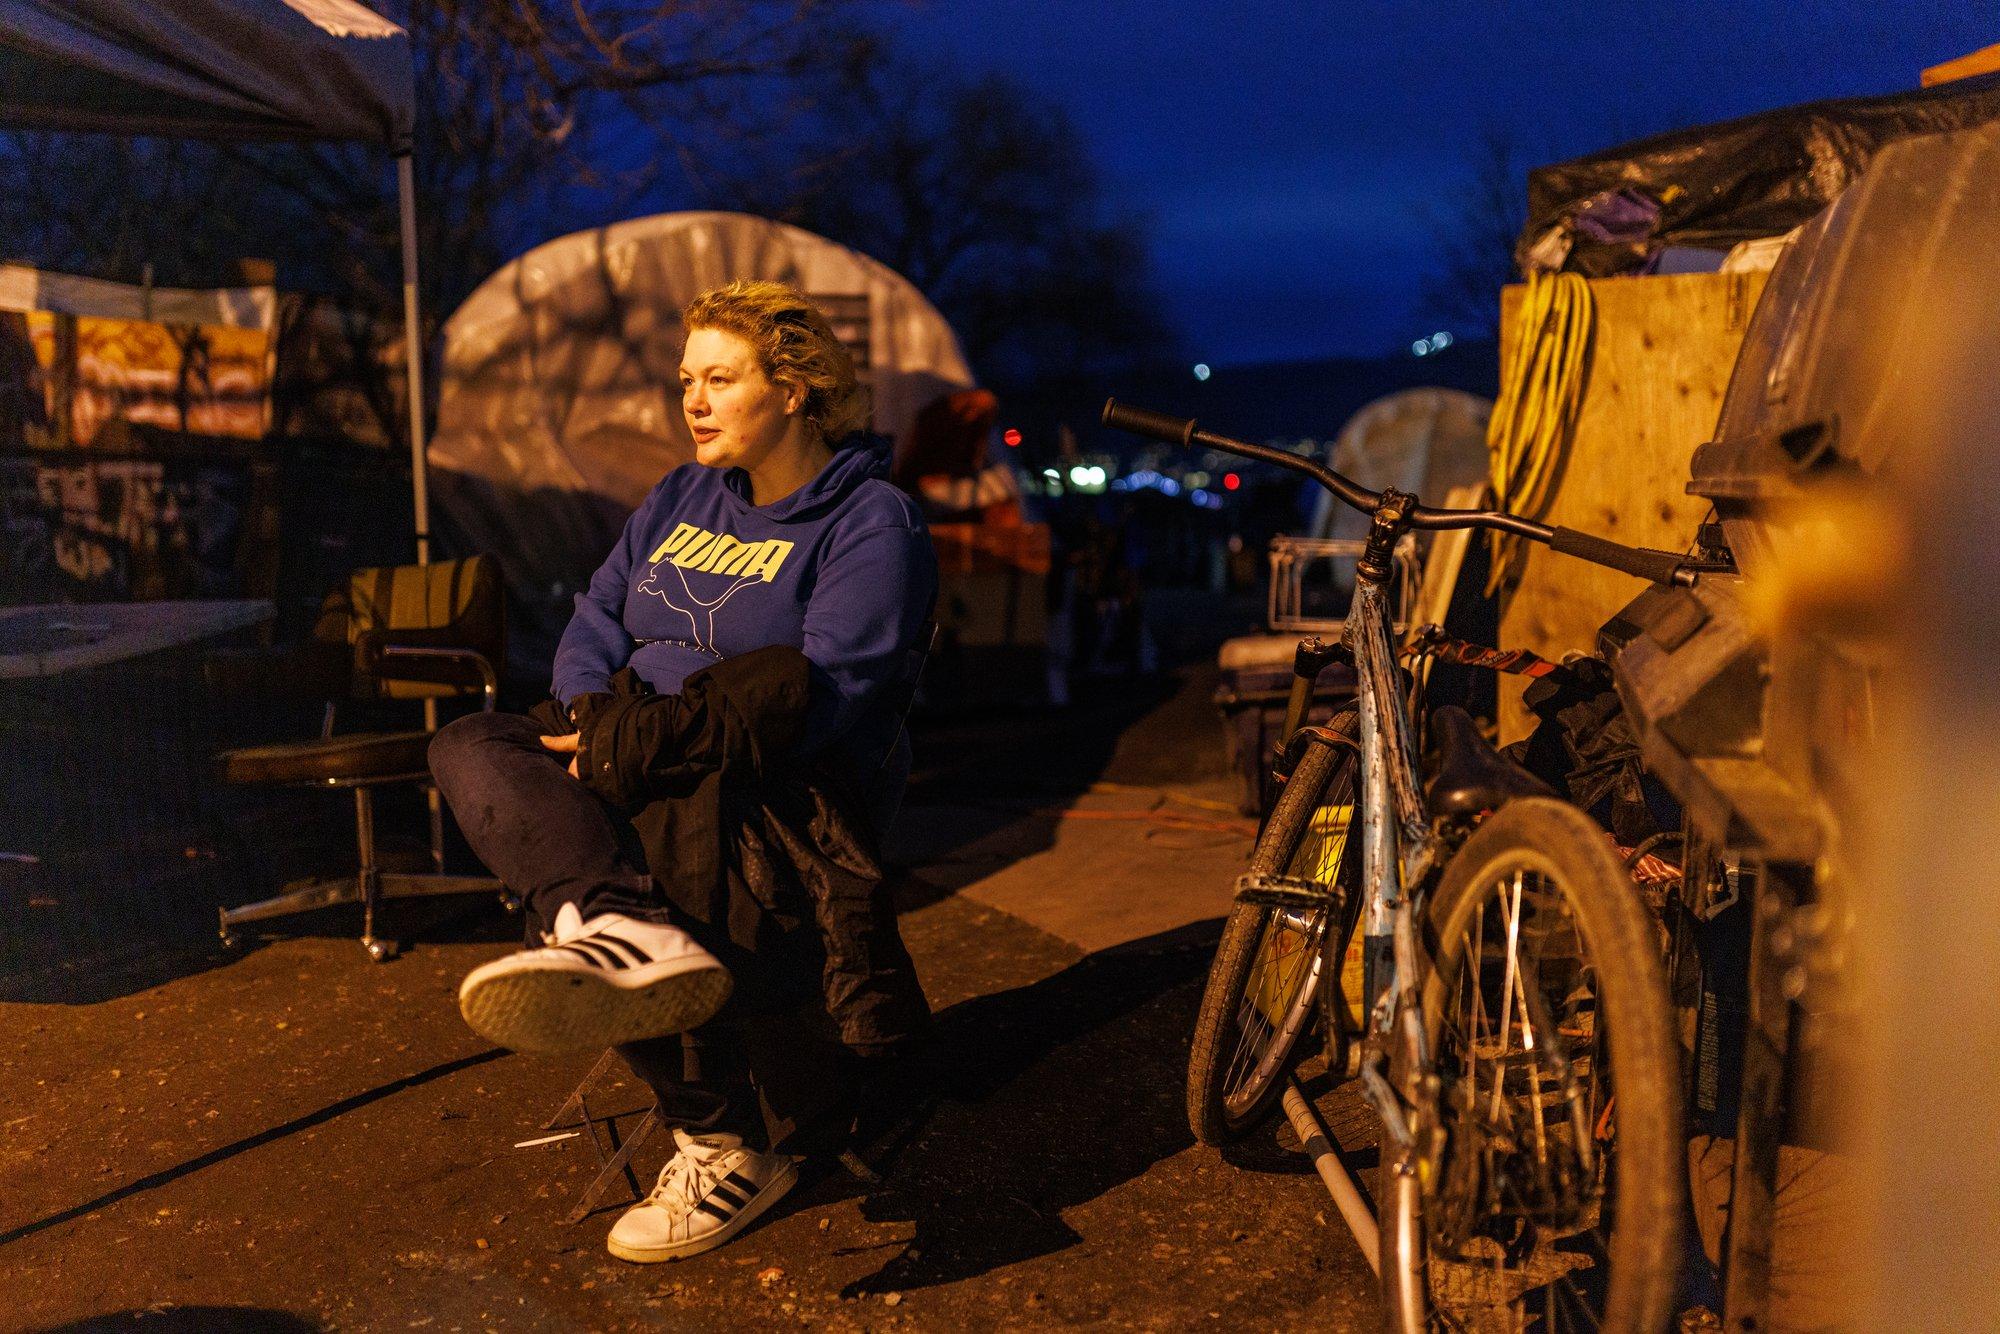 Sheena Derdak and her partner, Weston, arrived in CRAB Park in the summer of 2022 after leaving a massive encampment on East Hastings Street that had become overwhelming and chaotic. Derdak soon became part of the parkâs routine, donninga high-viz vest one night a week for safety patrols and volunteering with an overdose-prevention program.